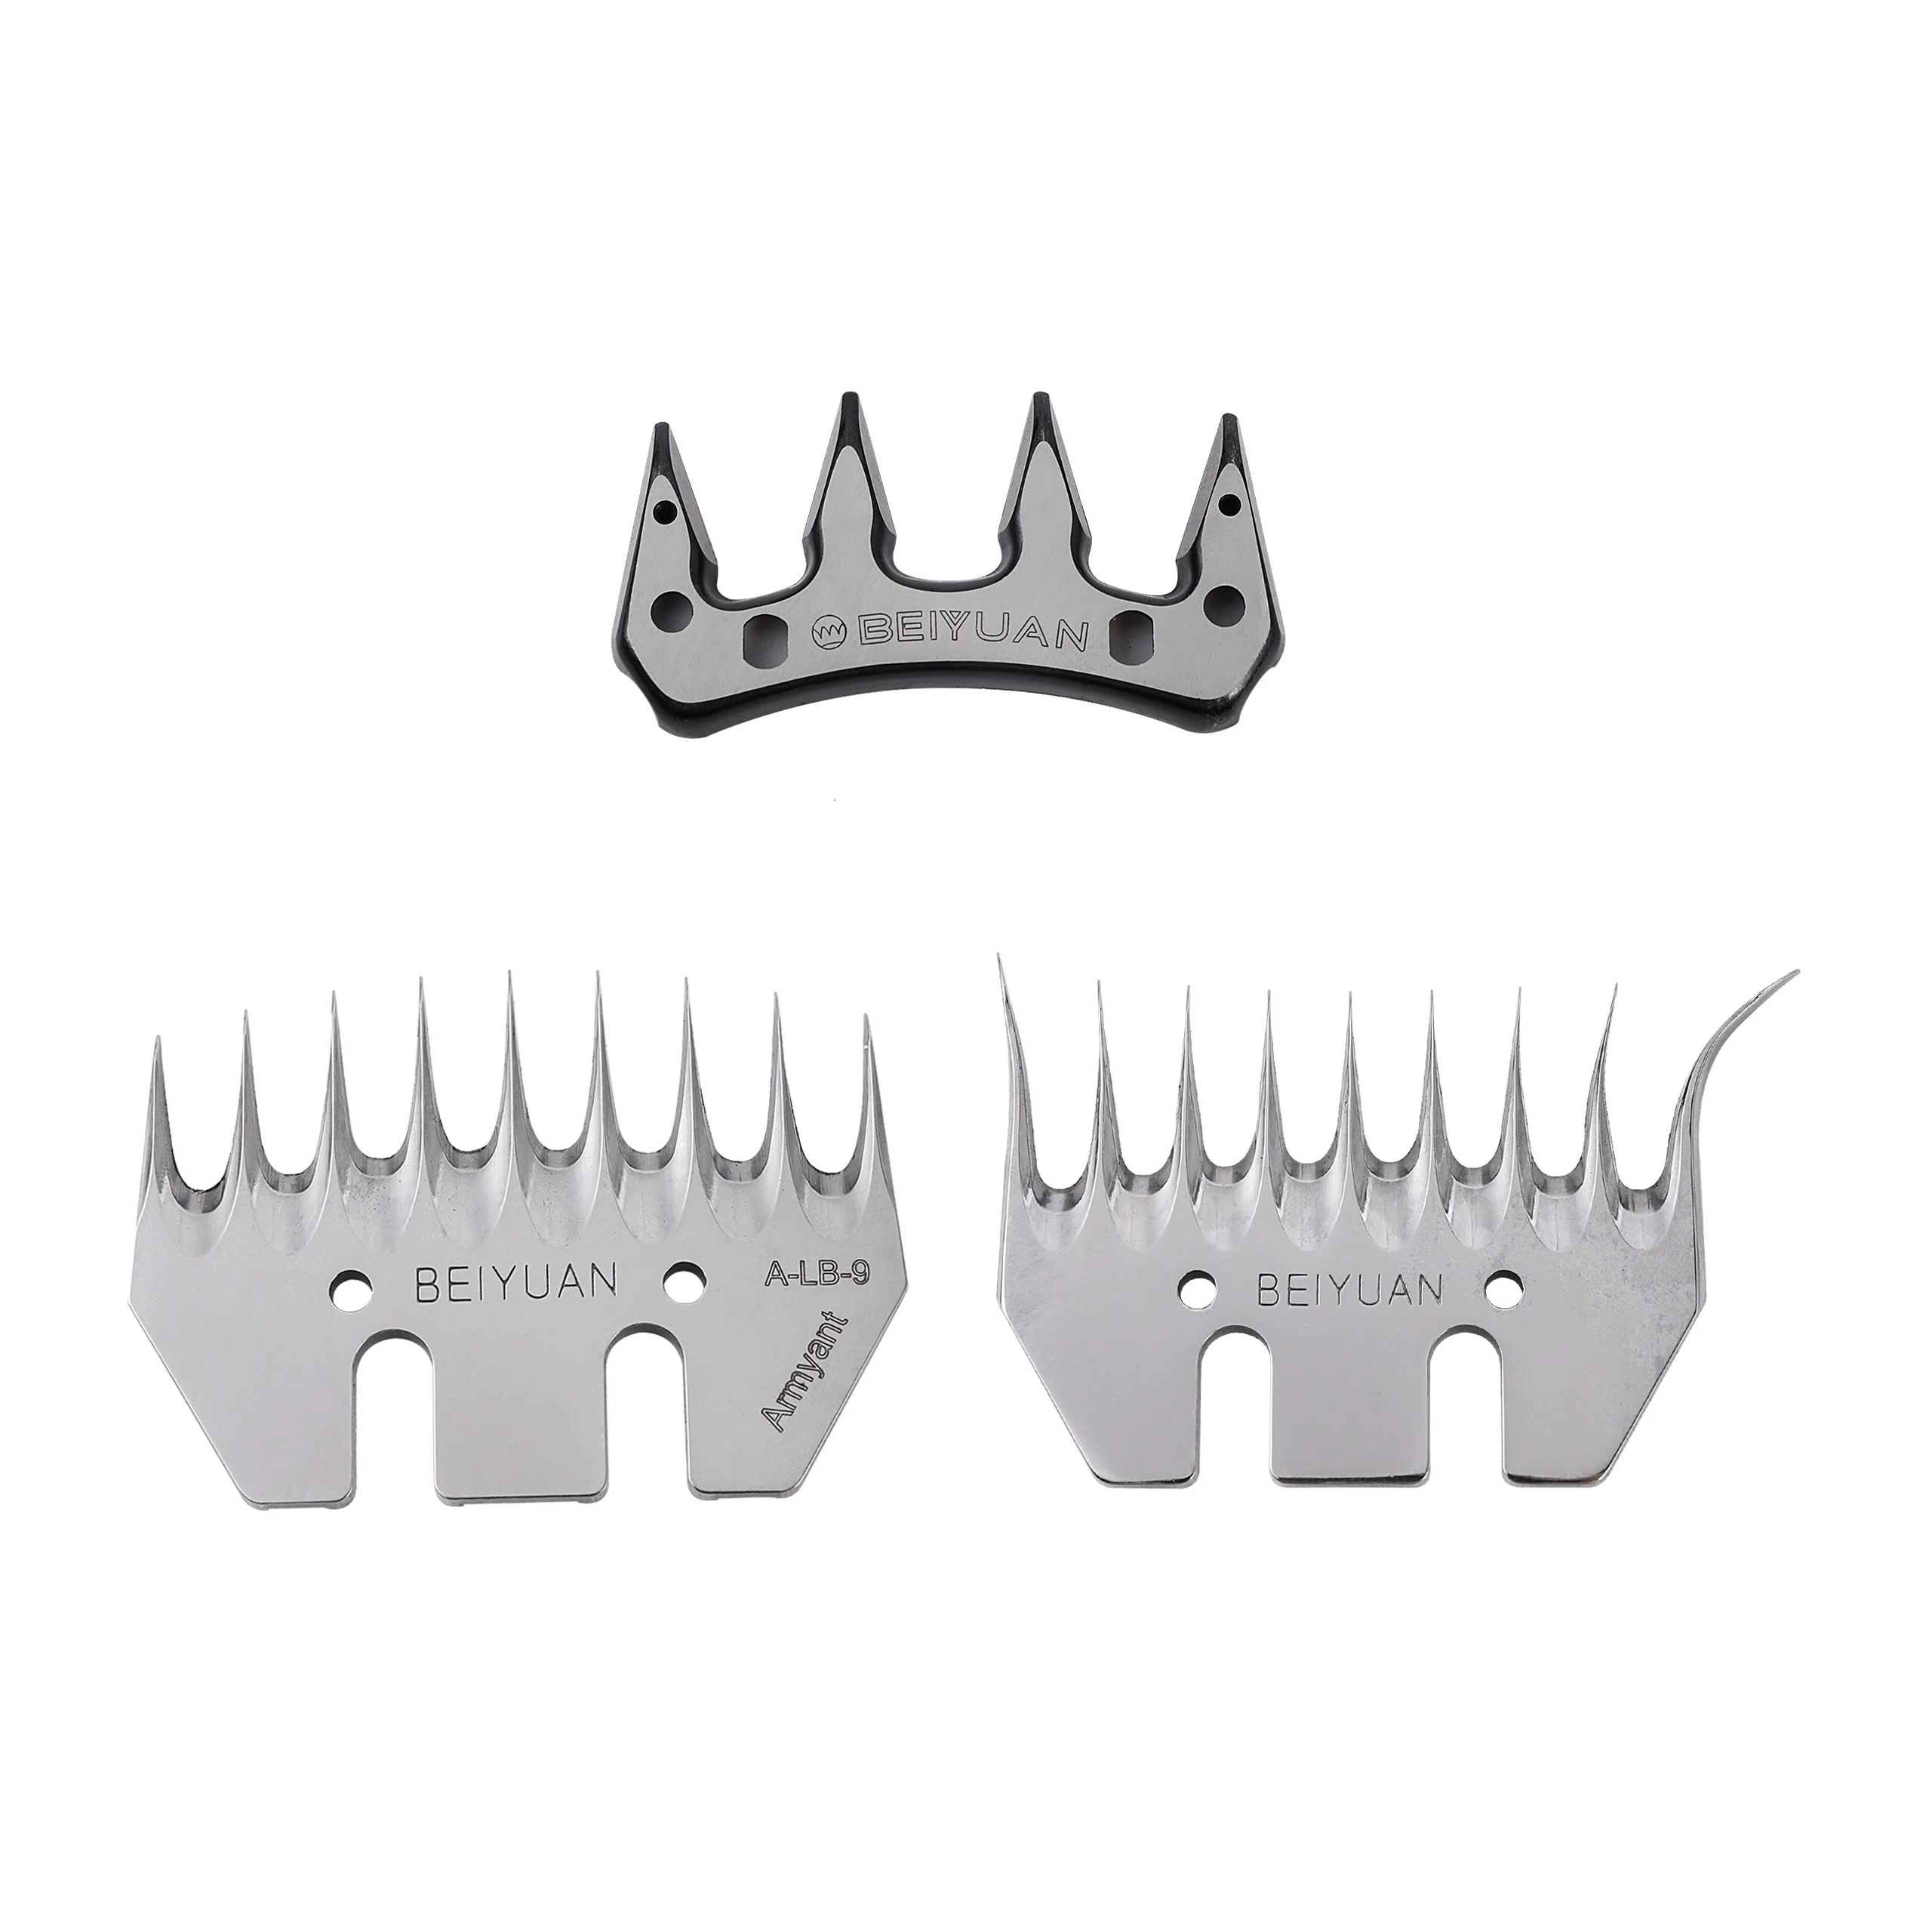 

1Pc 4/9 Tooth Blade Goat Sheep Shearing Clipper Comb Cutter Blade For Sheep Wool Farm Animal Livestock Cattle Sheep Equipment